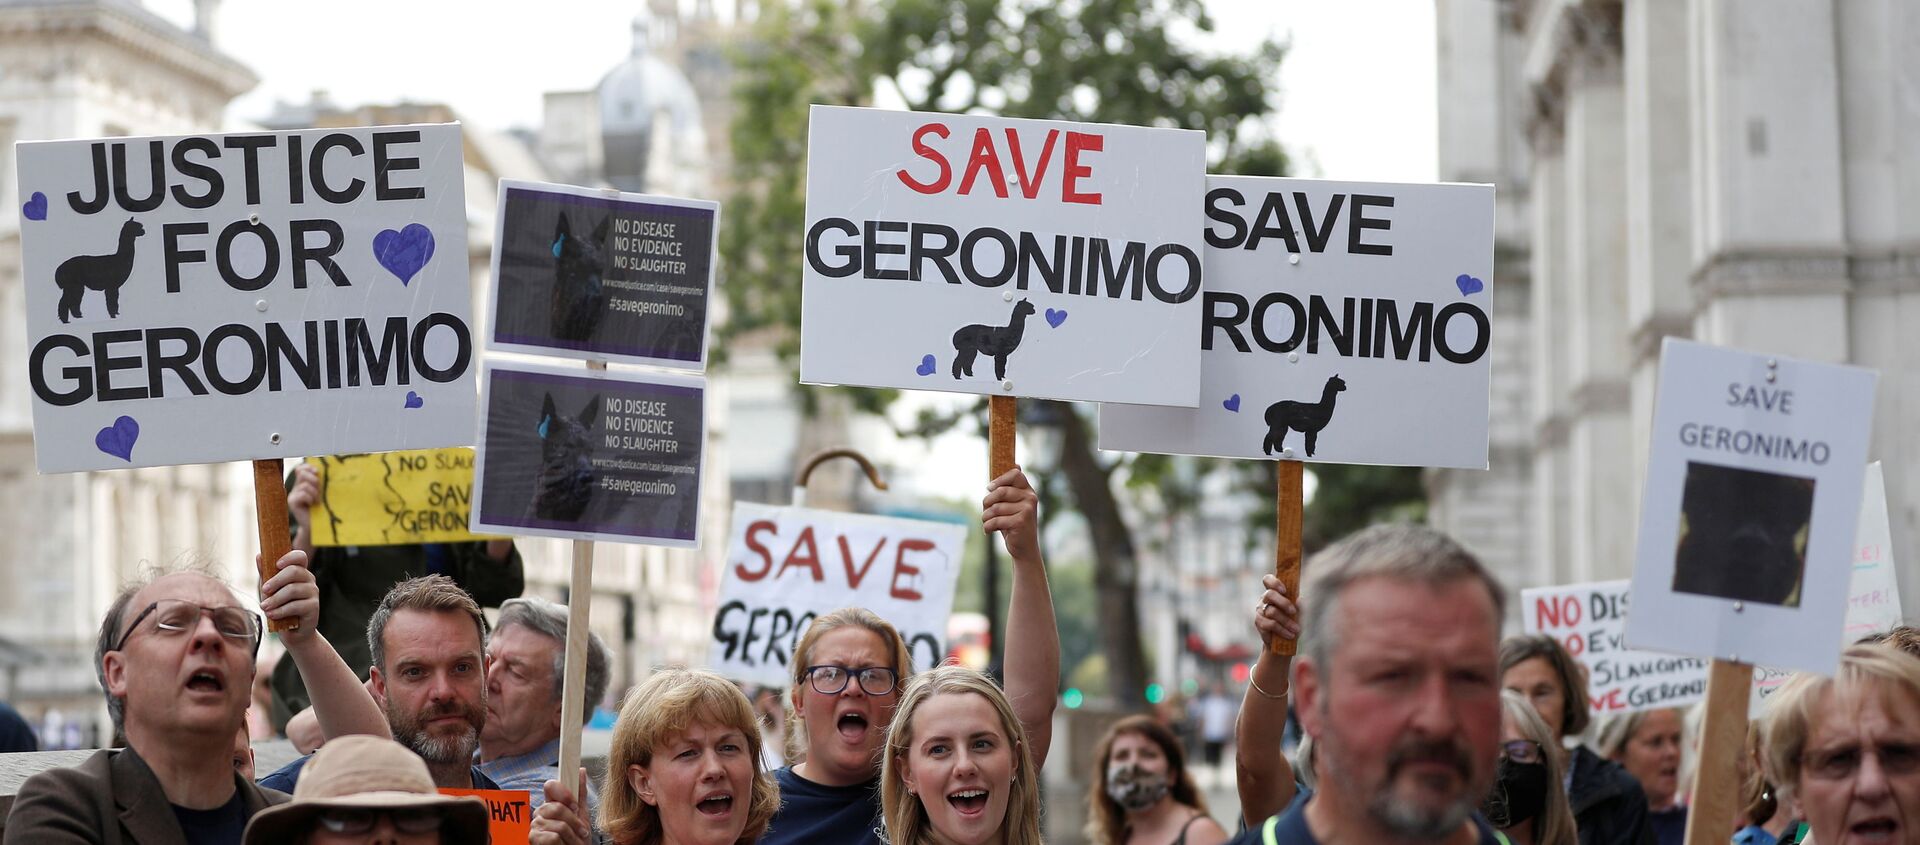 Protesters demonstrate against the ruling that Geronimo, an Alpaca believed to be carrying TB, has to be euthanised, in London, Britain, August 9, 2021 - Sputnik International, 1920, 31.08.2021